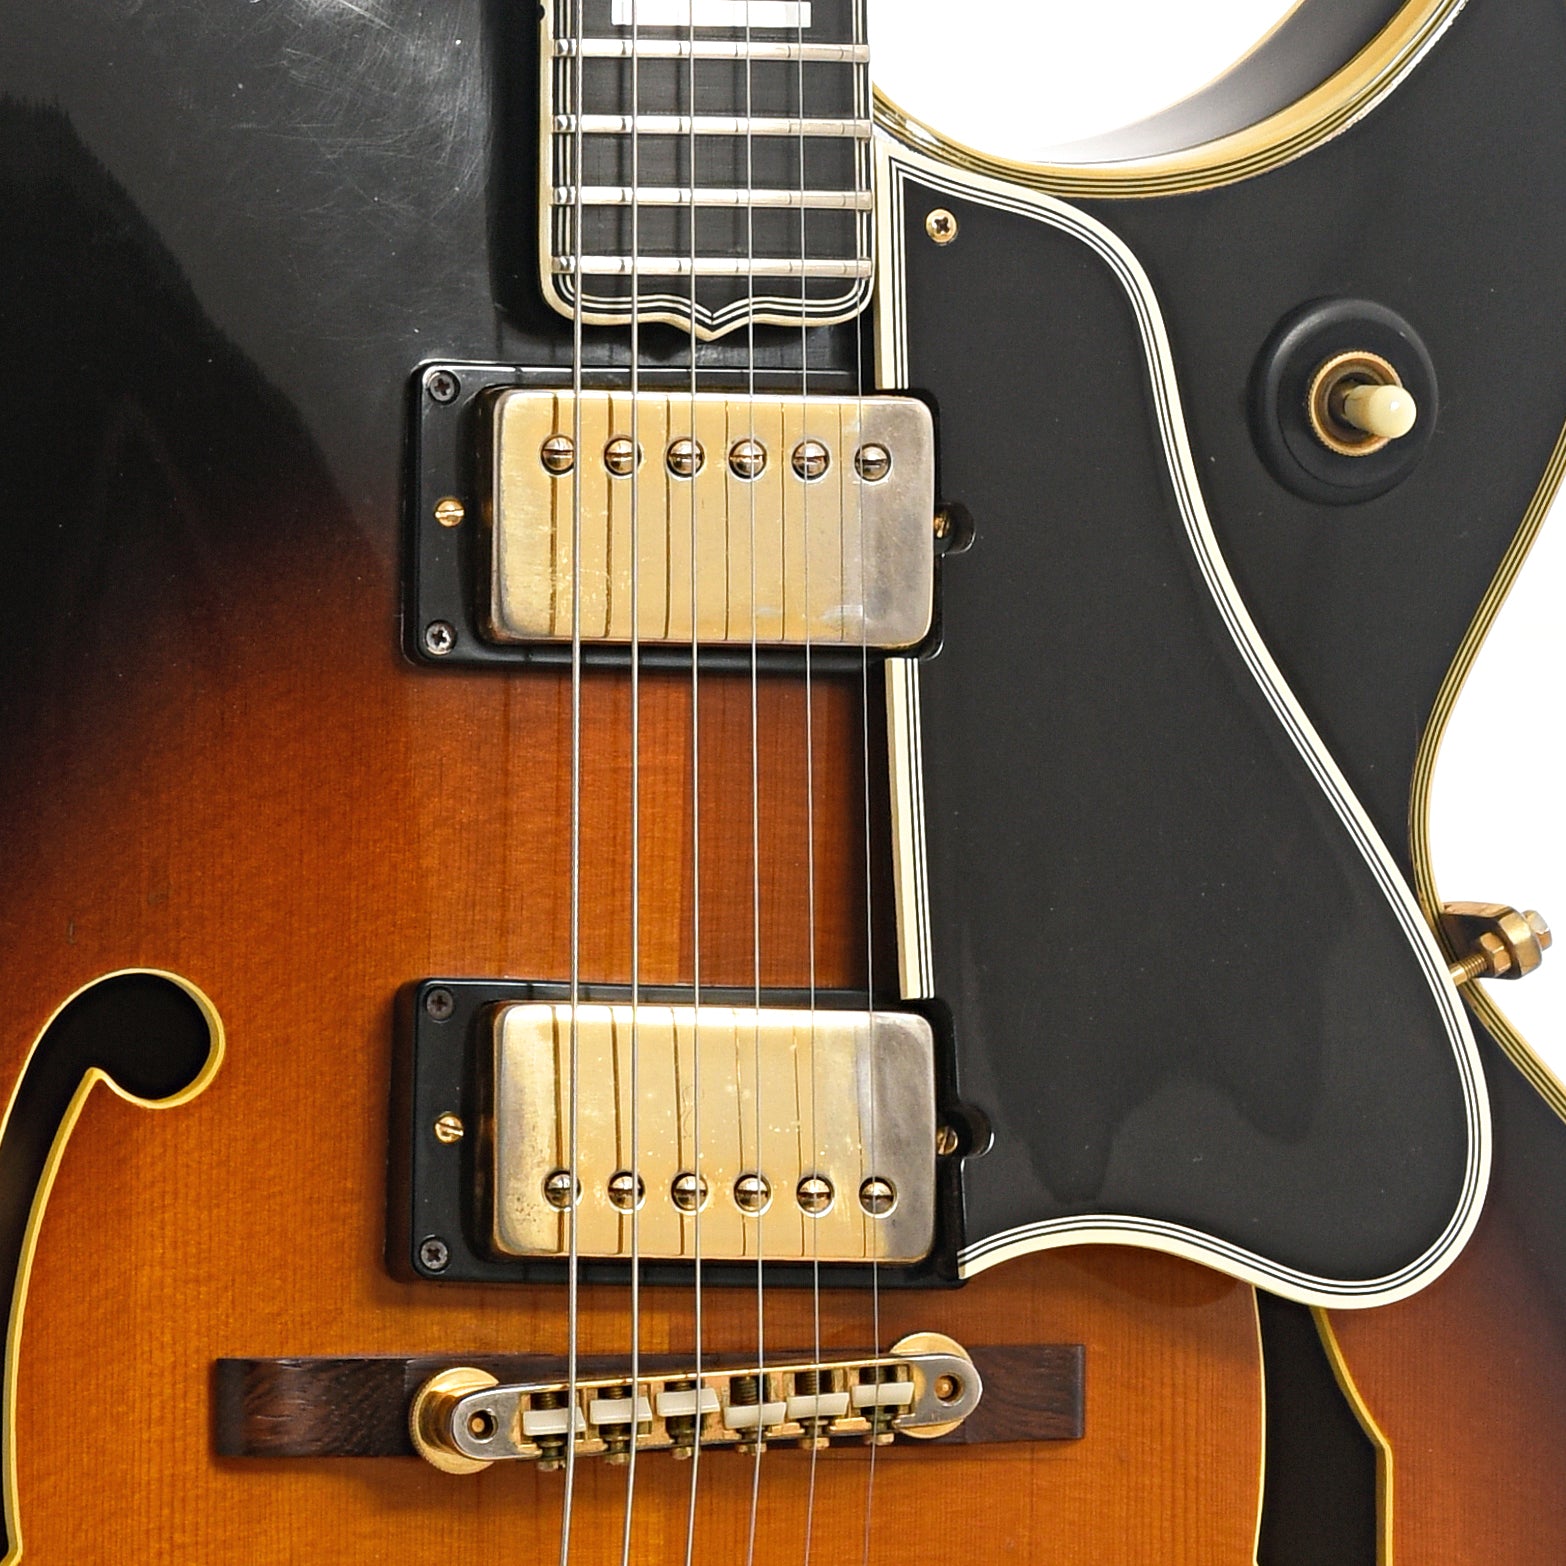 Pickups, bridge and pickguard of Gibson Byrdland Hollow Body 